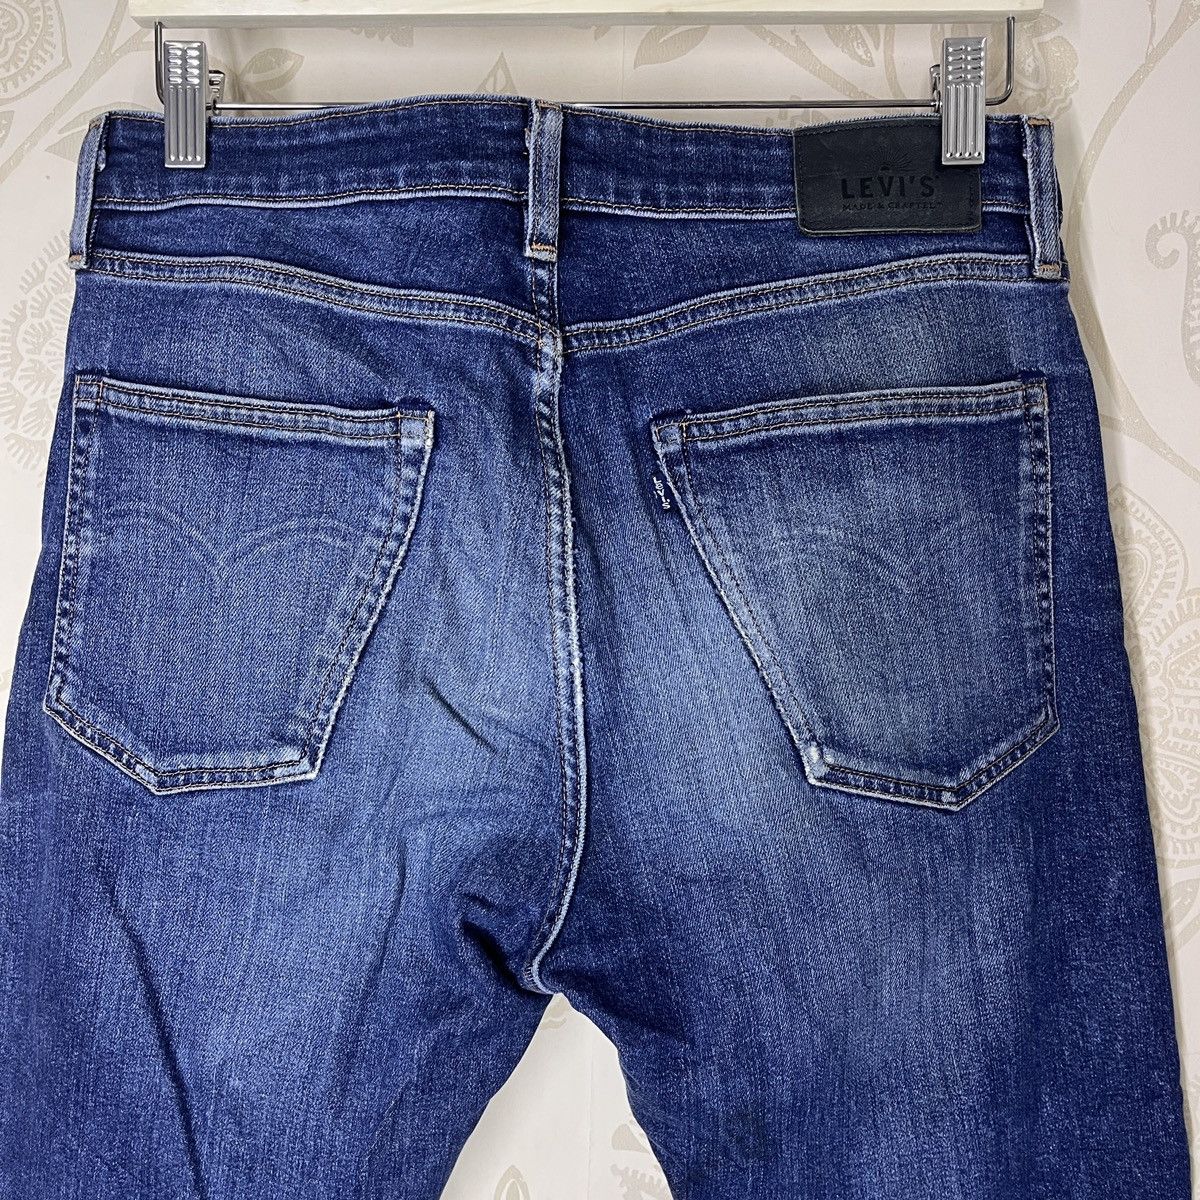 Levis Made & Crafted Blue Label Distressed Denim Jeans - 24